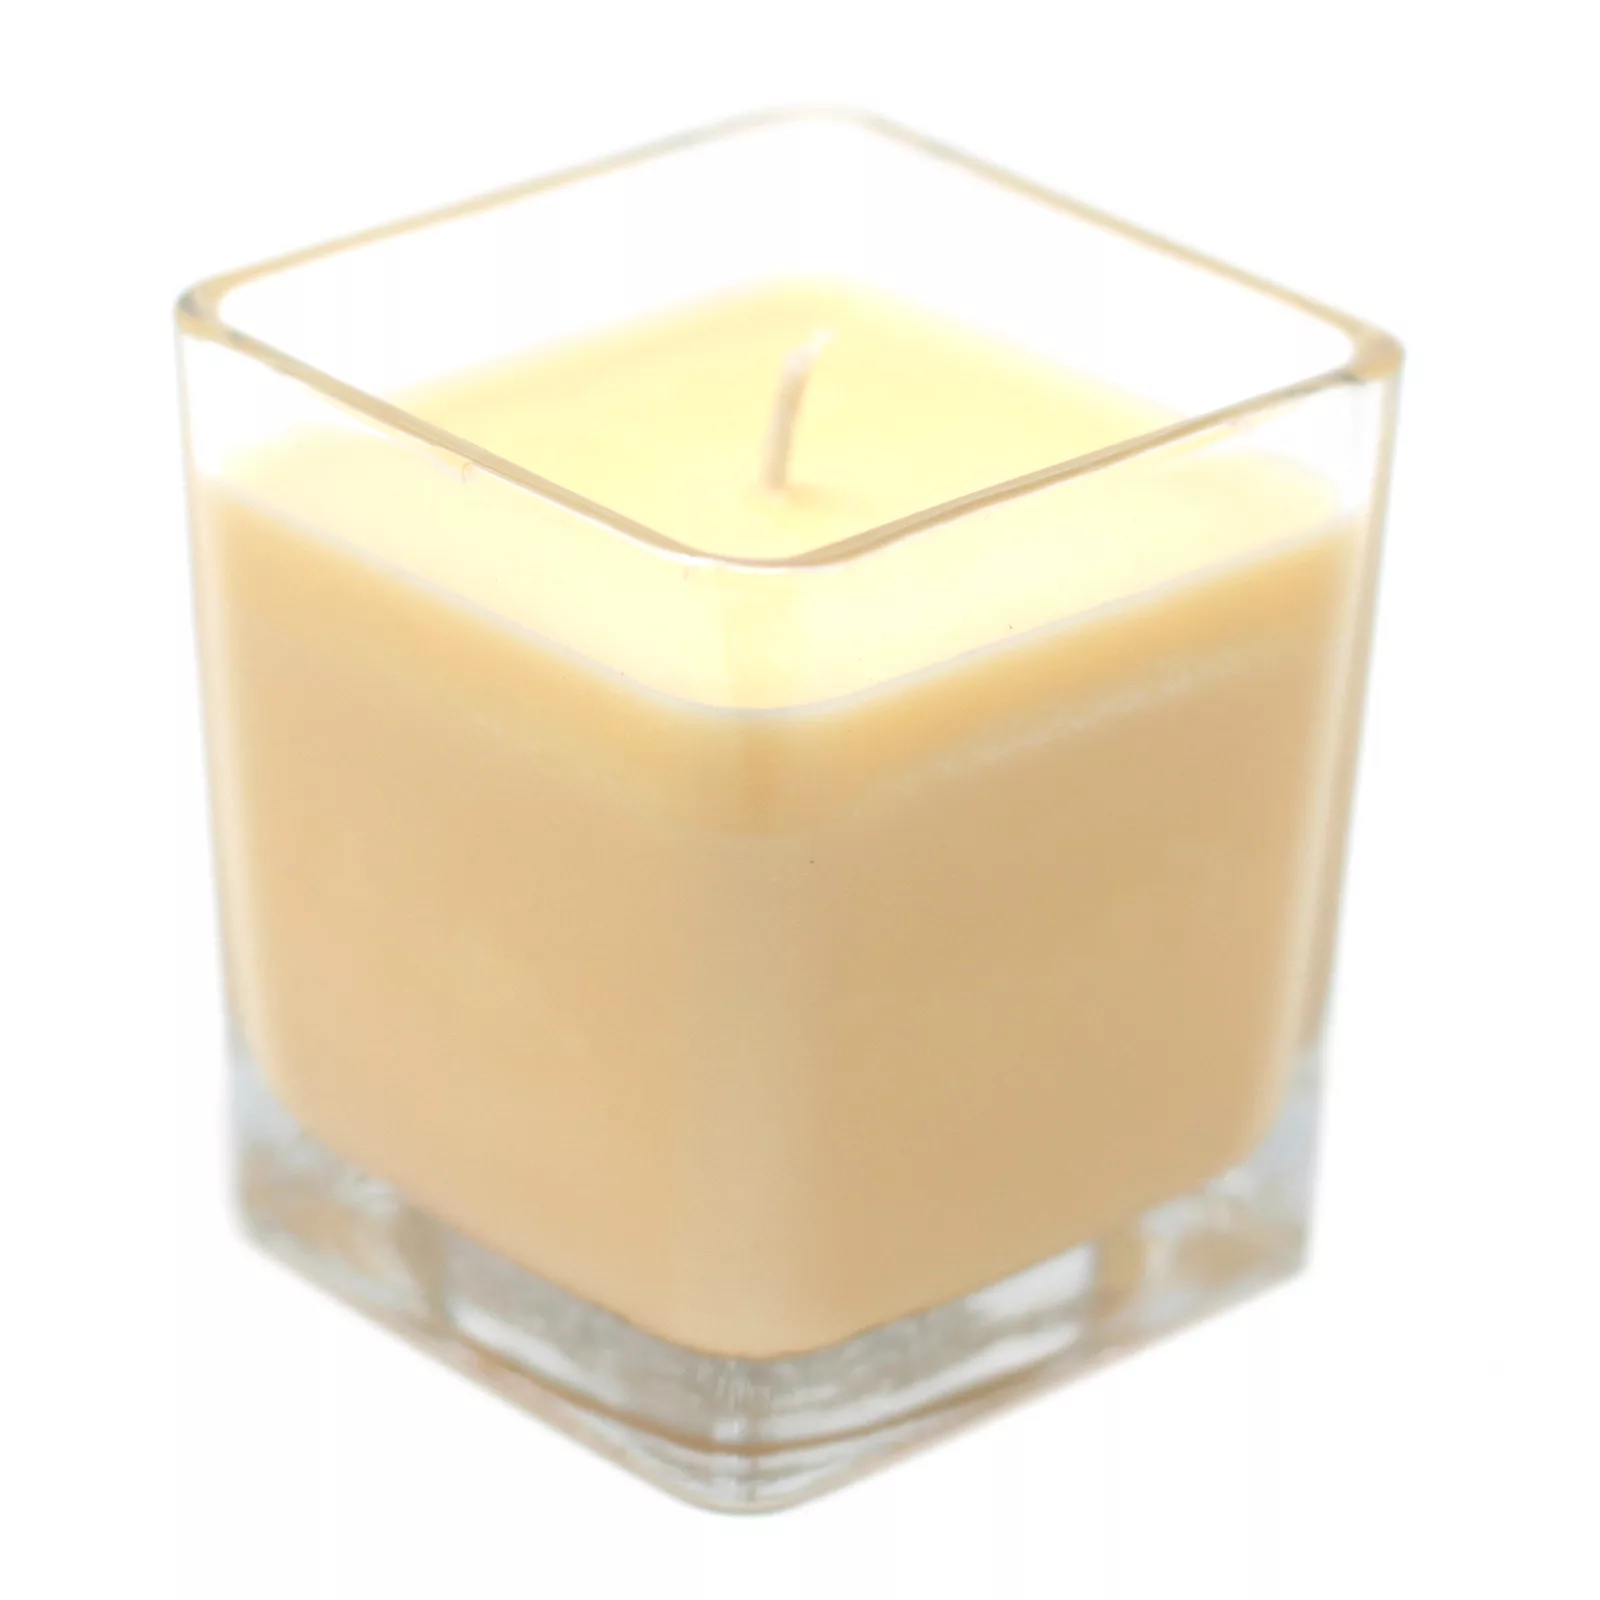 White Label Soy Wax Jar Candle – Grapefruit & Ginger